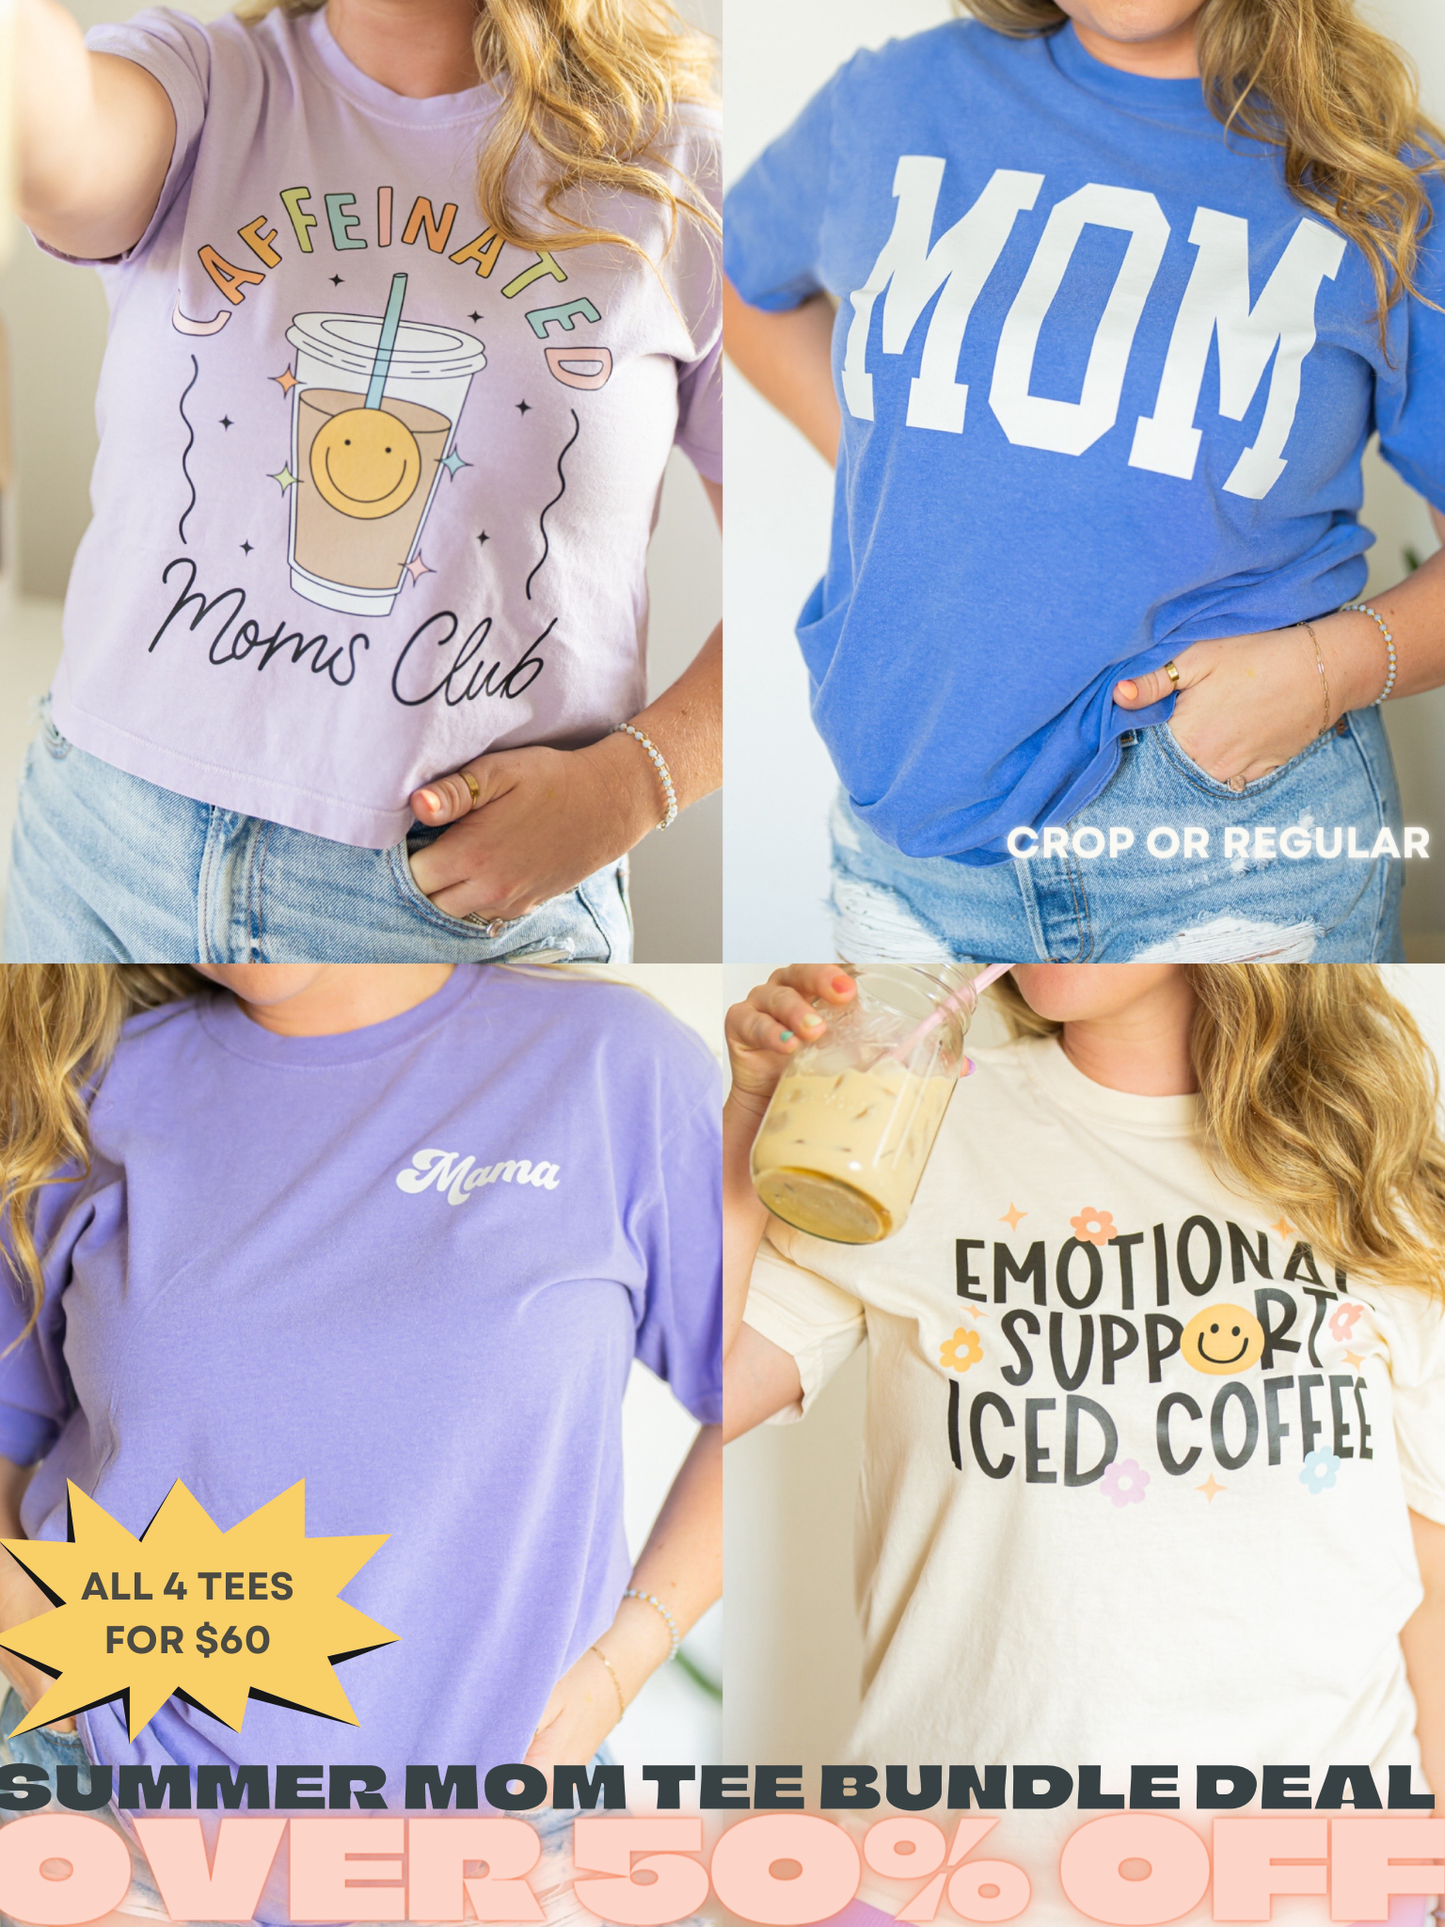 Emotional Support ICED Coffee - Cropped Tee (Smoke)